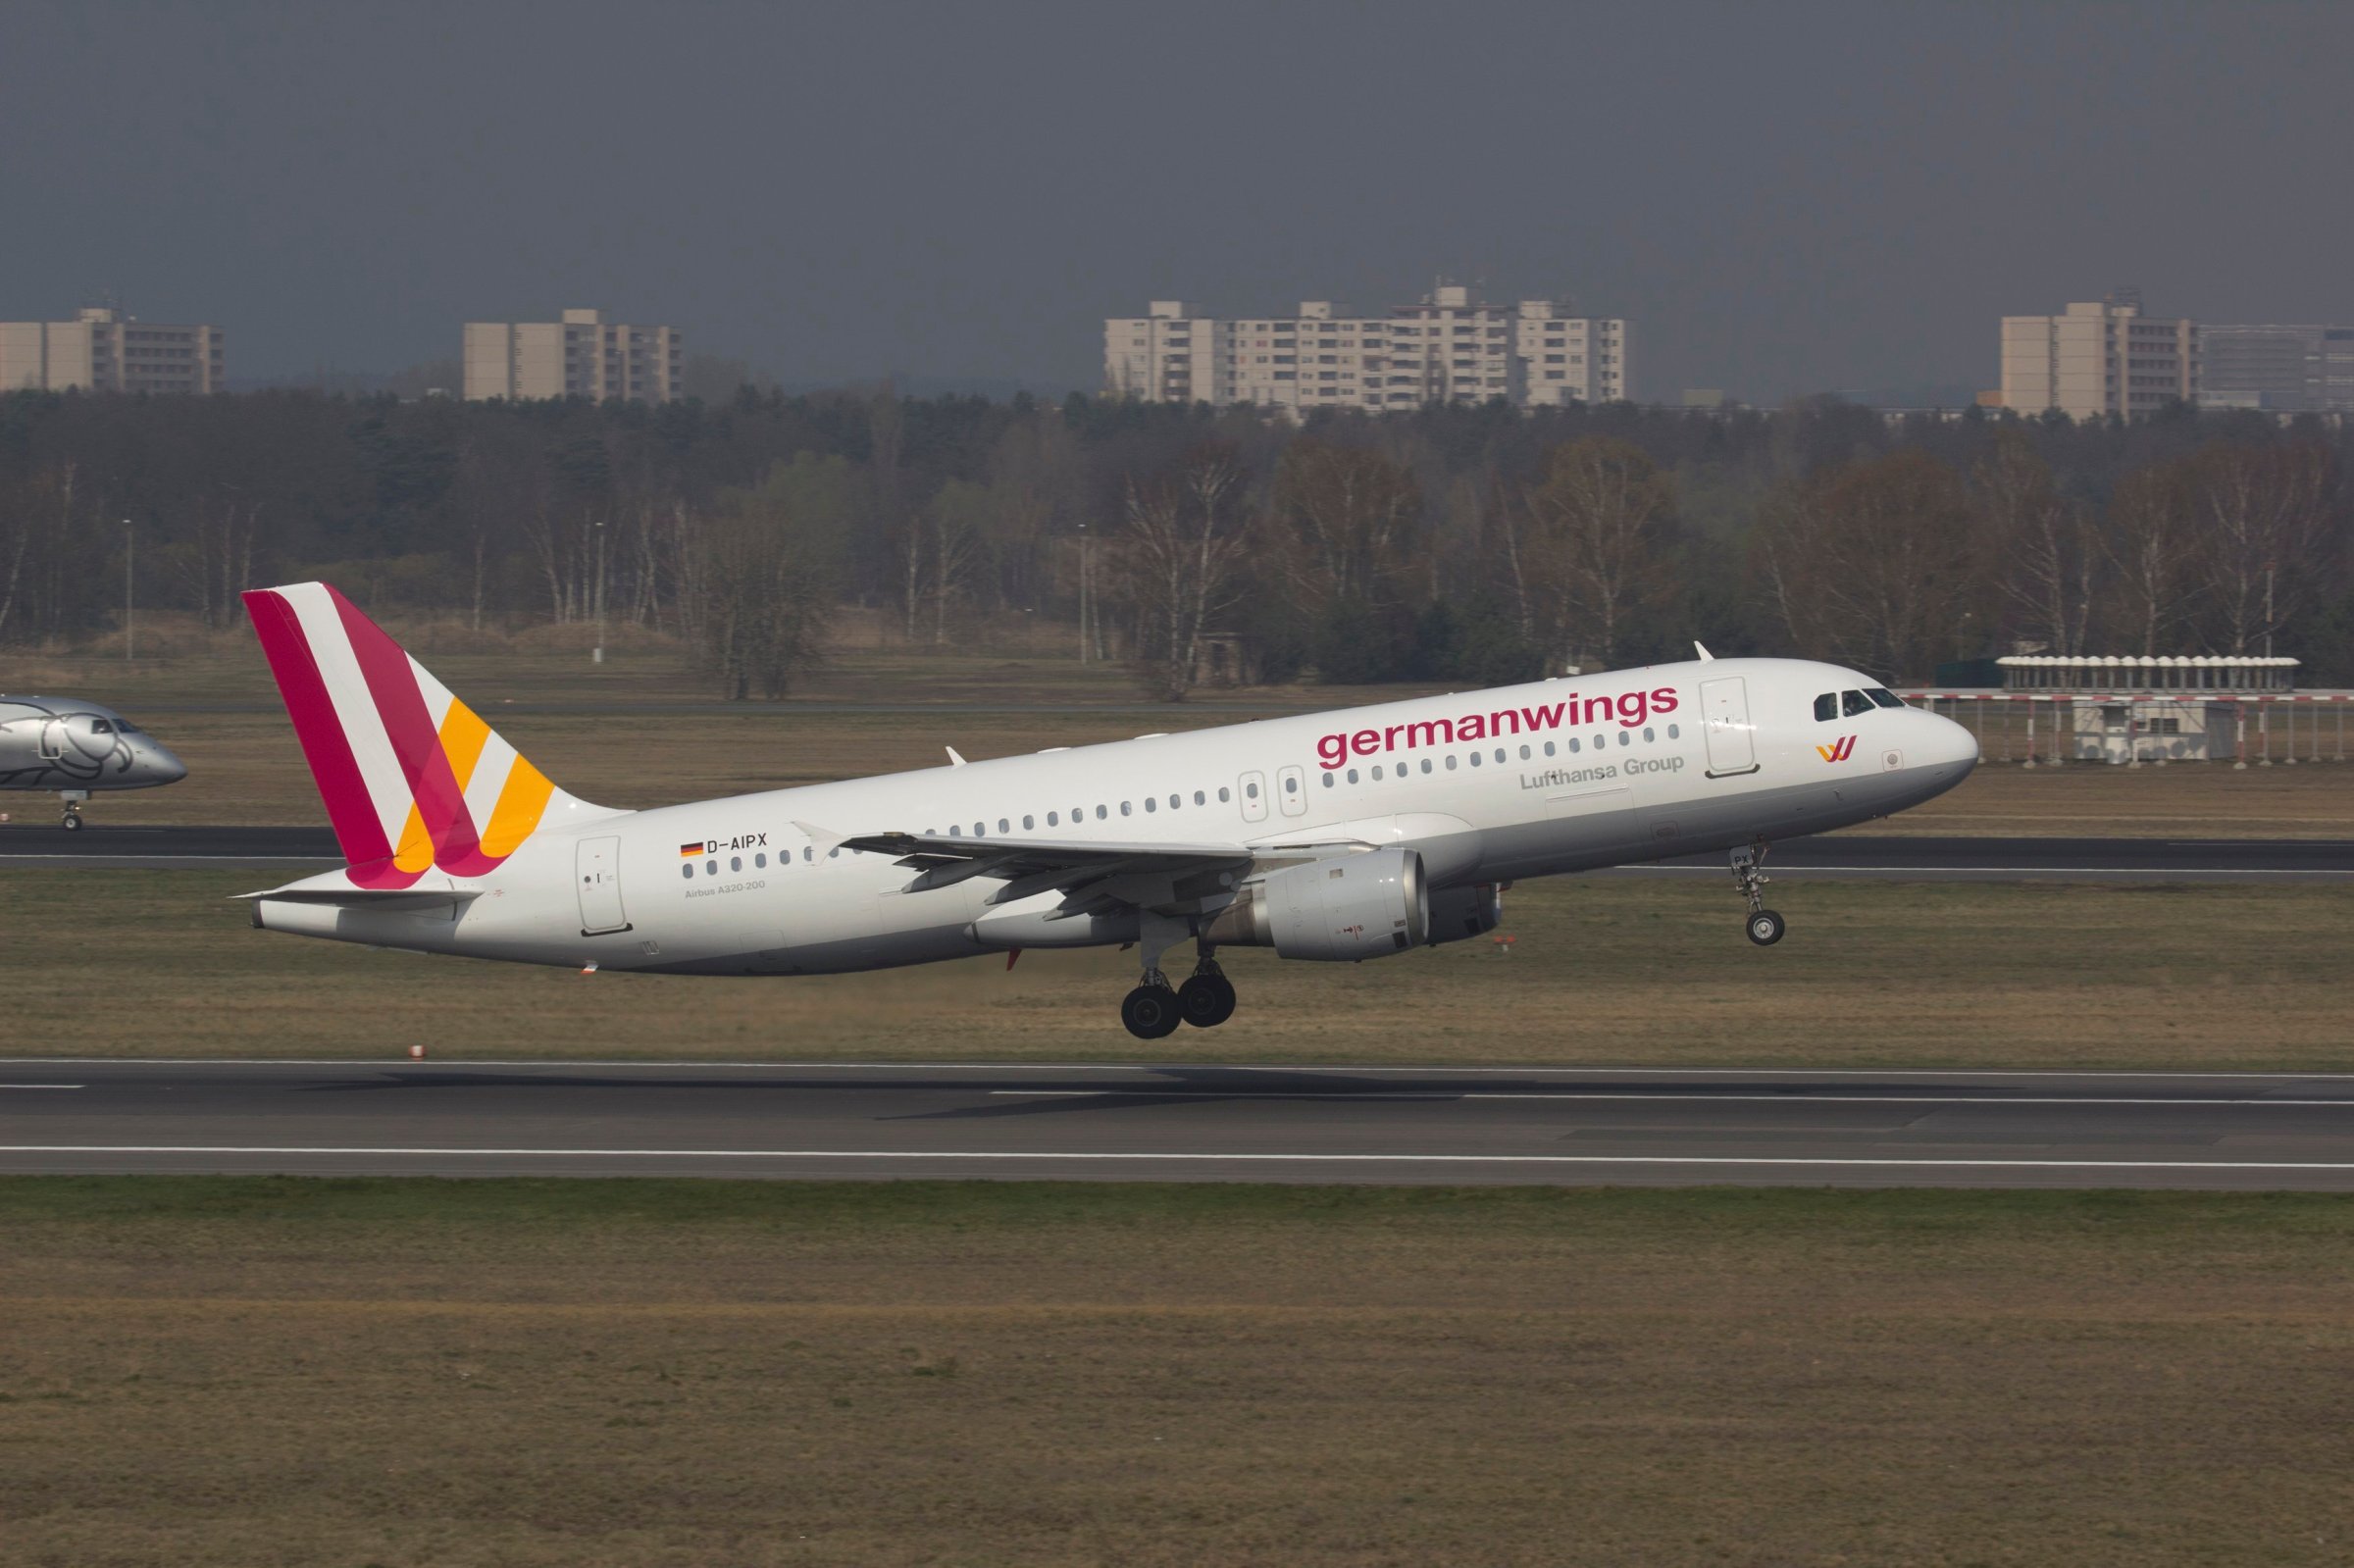 A Germanwings Airbus A320 is seen at the Berlin airport, March 29, 2014. An Airbus plane of the same model crashed in southern France en route from Barcelona to Duesseldorf, on March 24, 2015 police and aviation officials said.